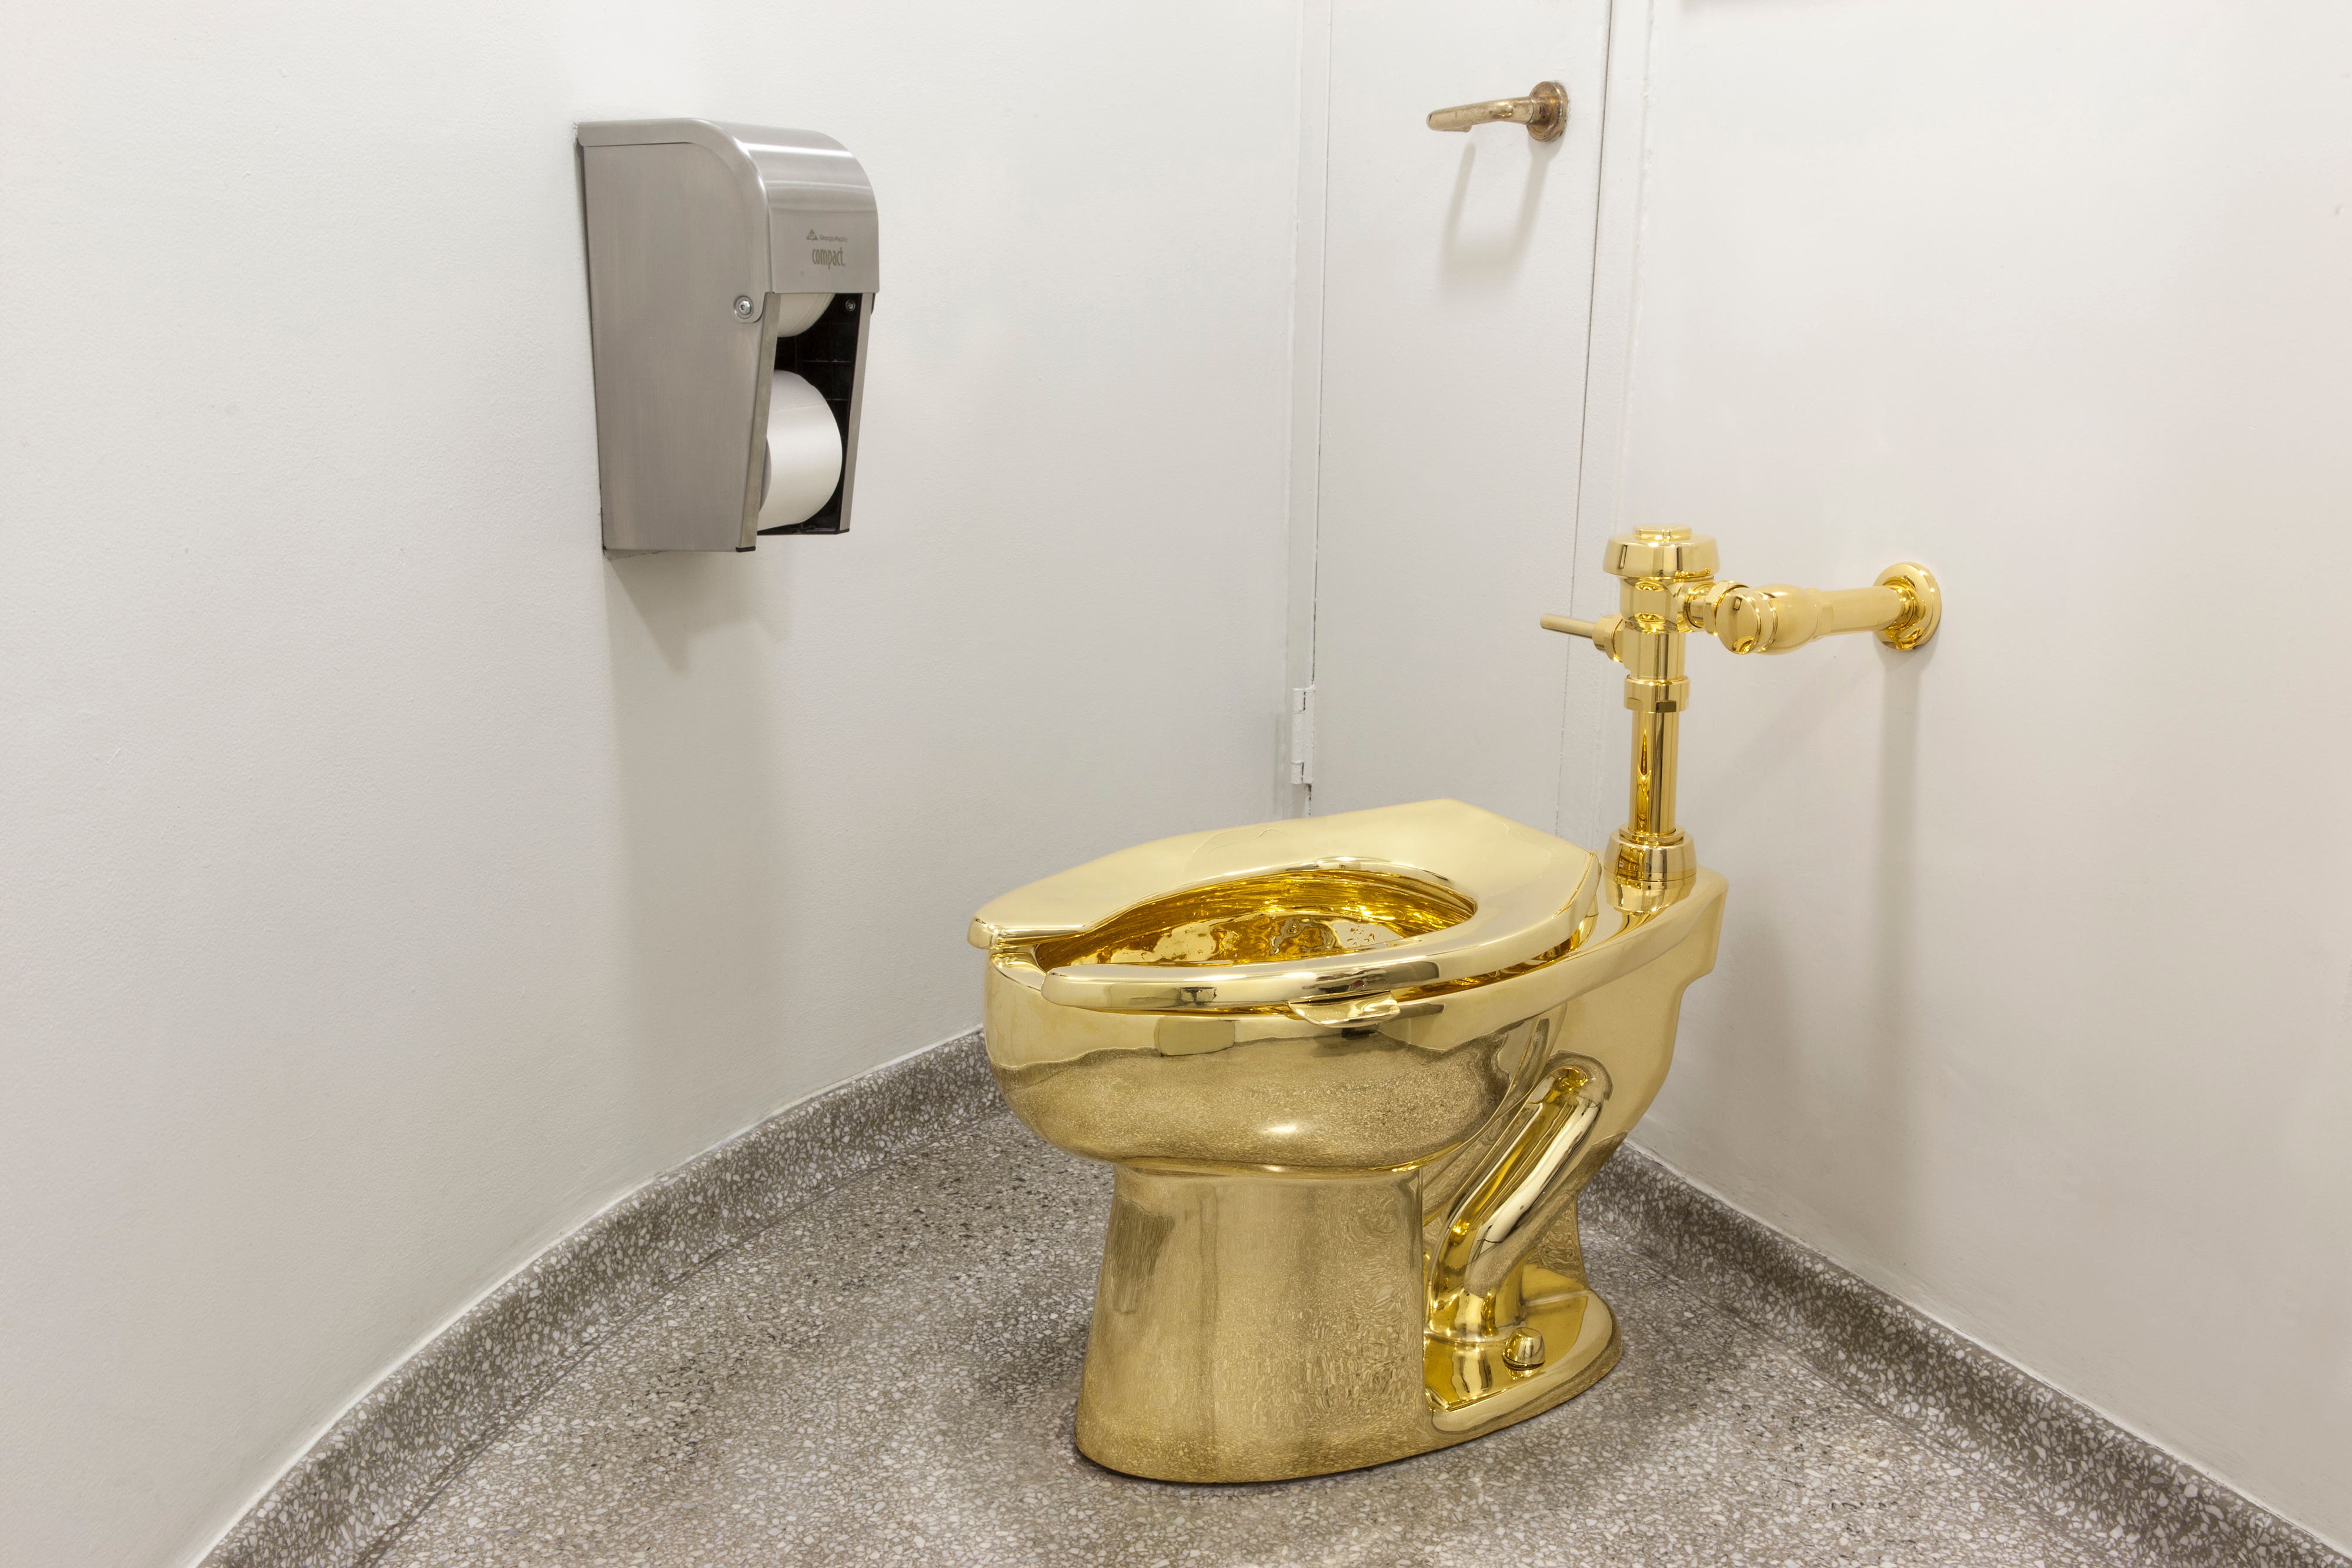 The fully functioning toilet, titled ‘America’, was created by Italian artist Maurizio Cattelan and housed in the Oxfordshire country house where Winston Churchill was born